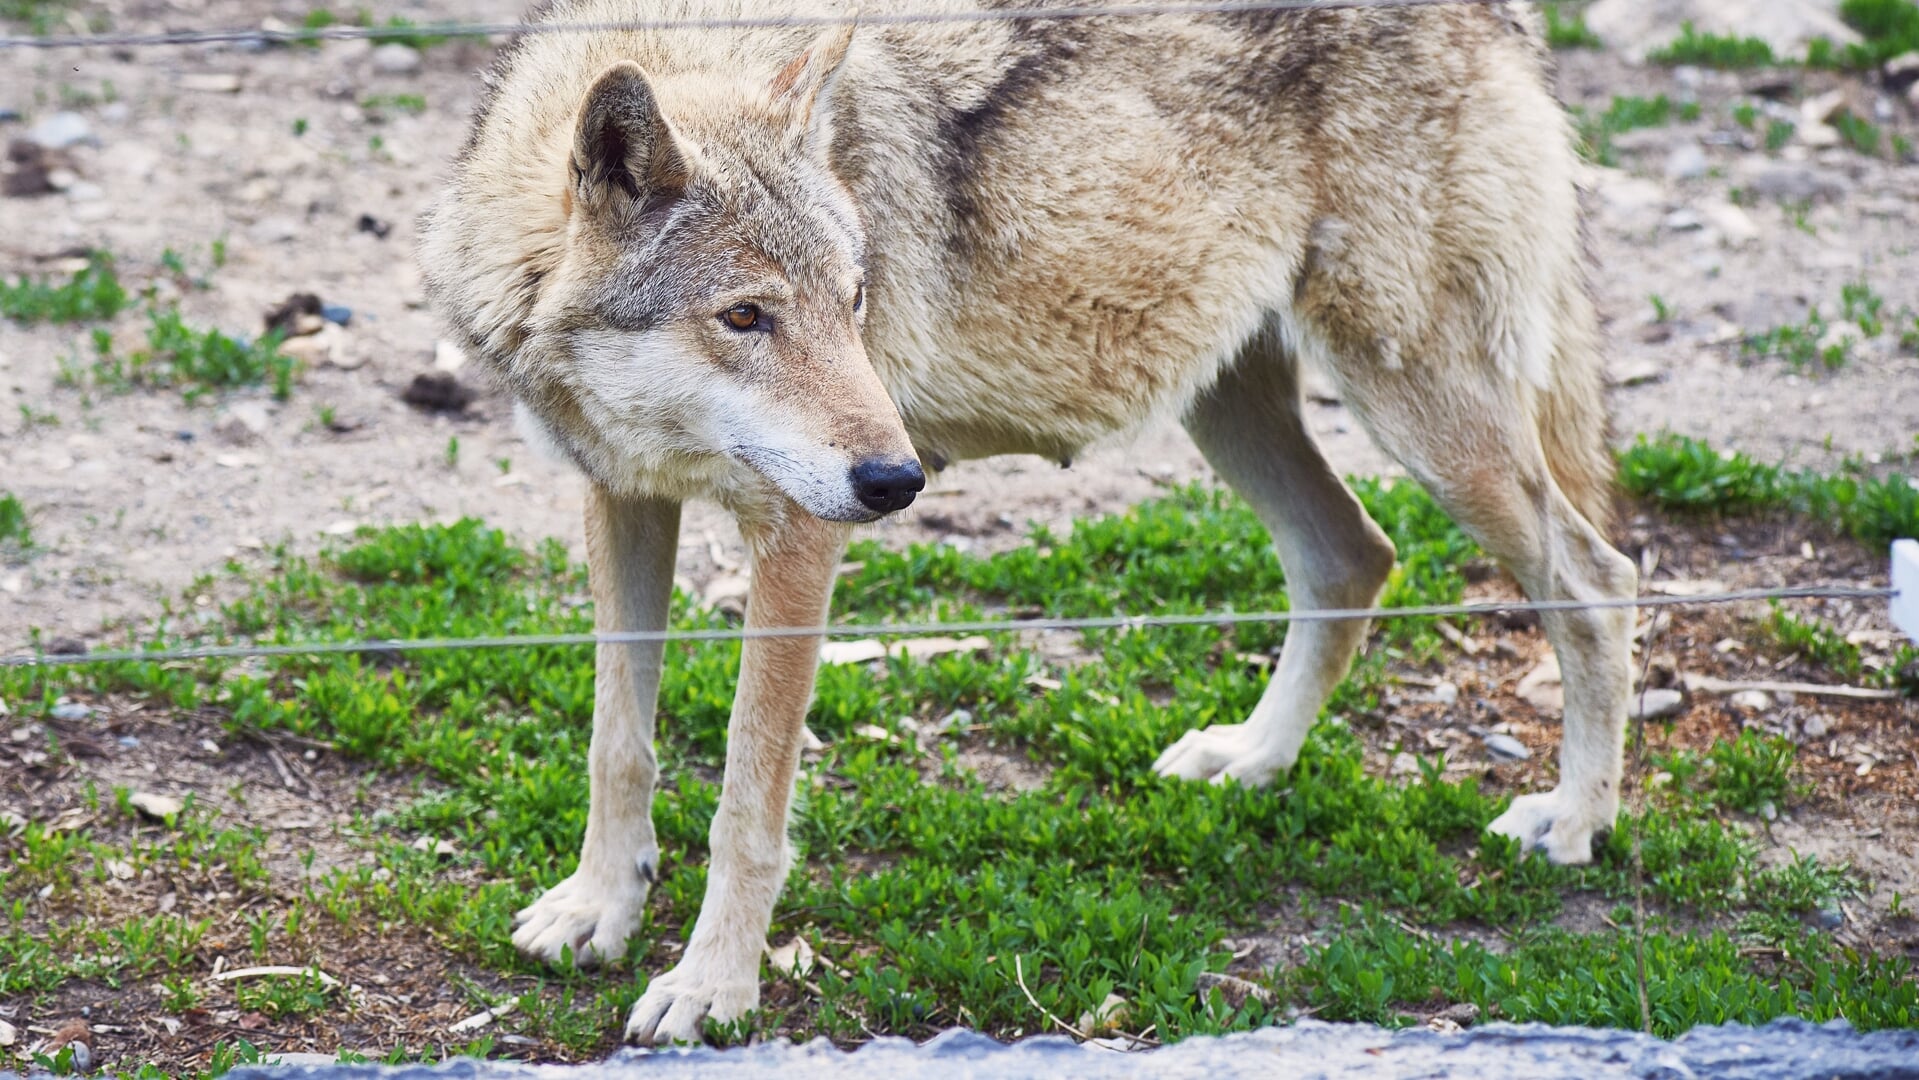 A wild wolf looks through a wire fence. Nature reserve. Close-up